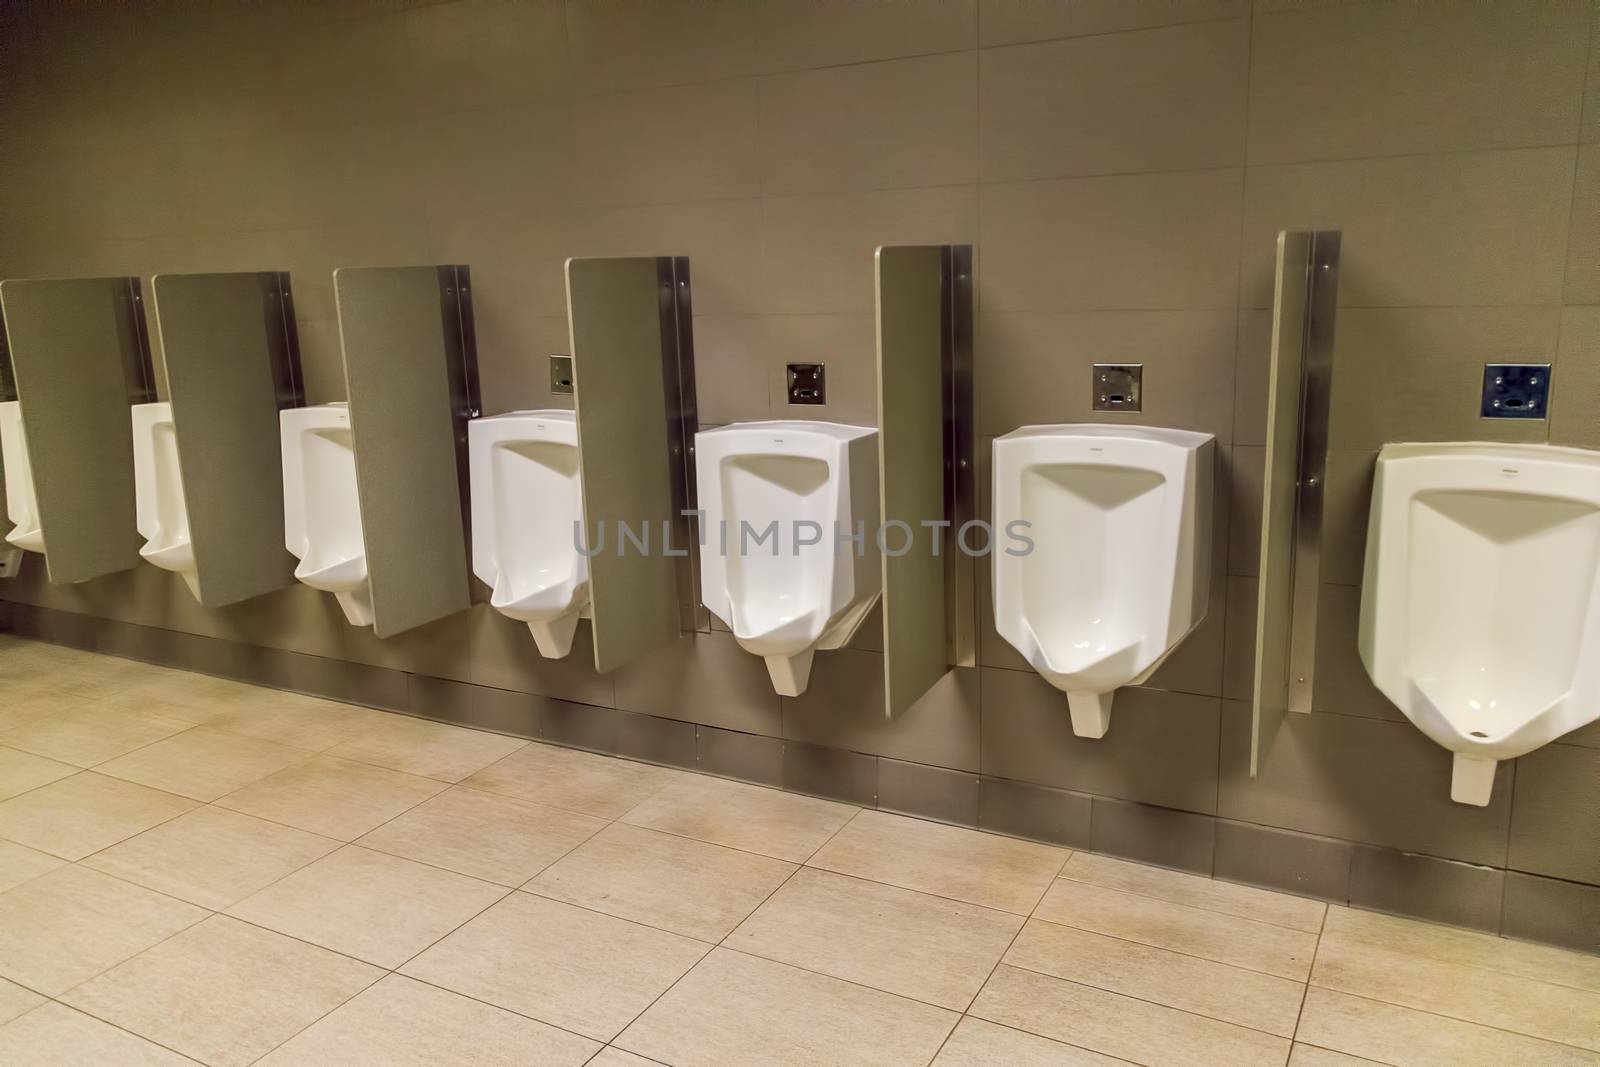 Row of mens urinals on a wall